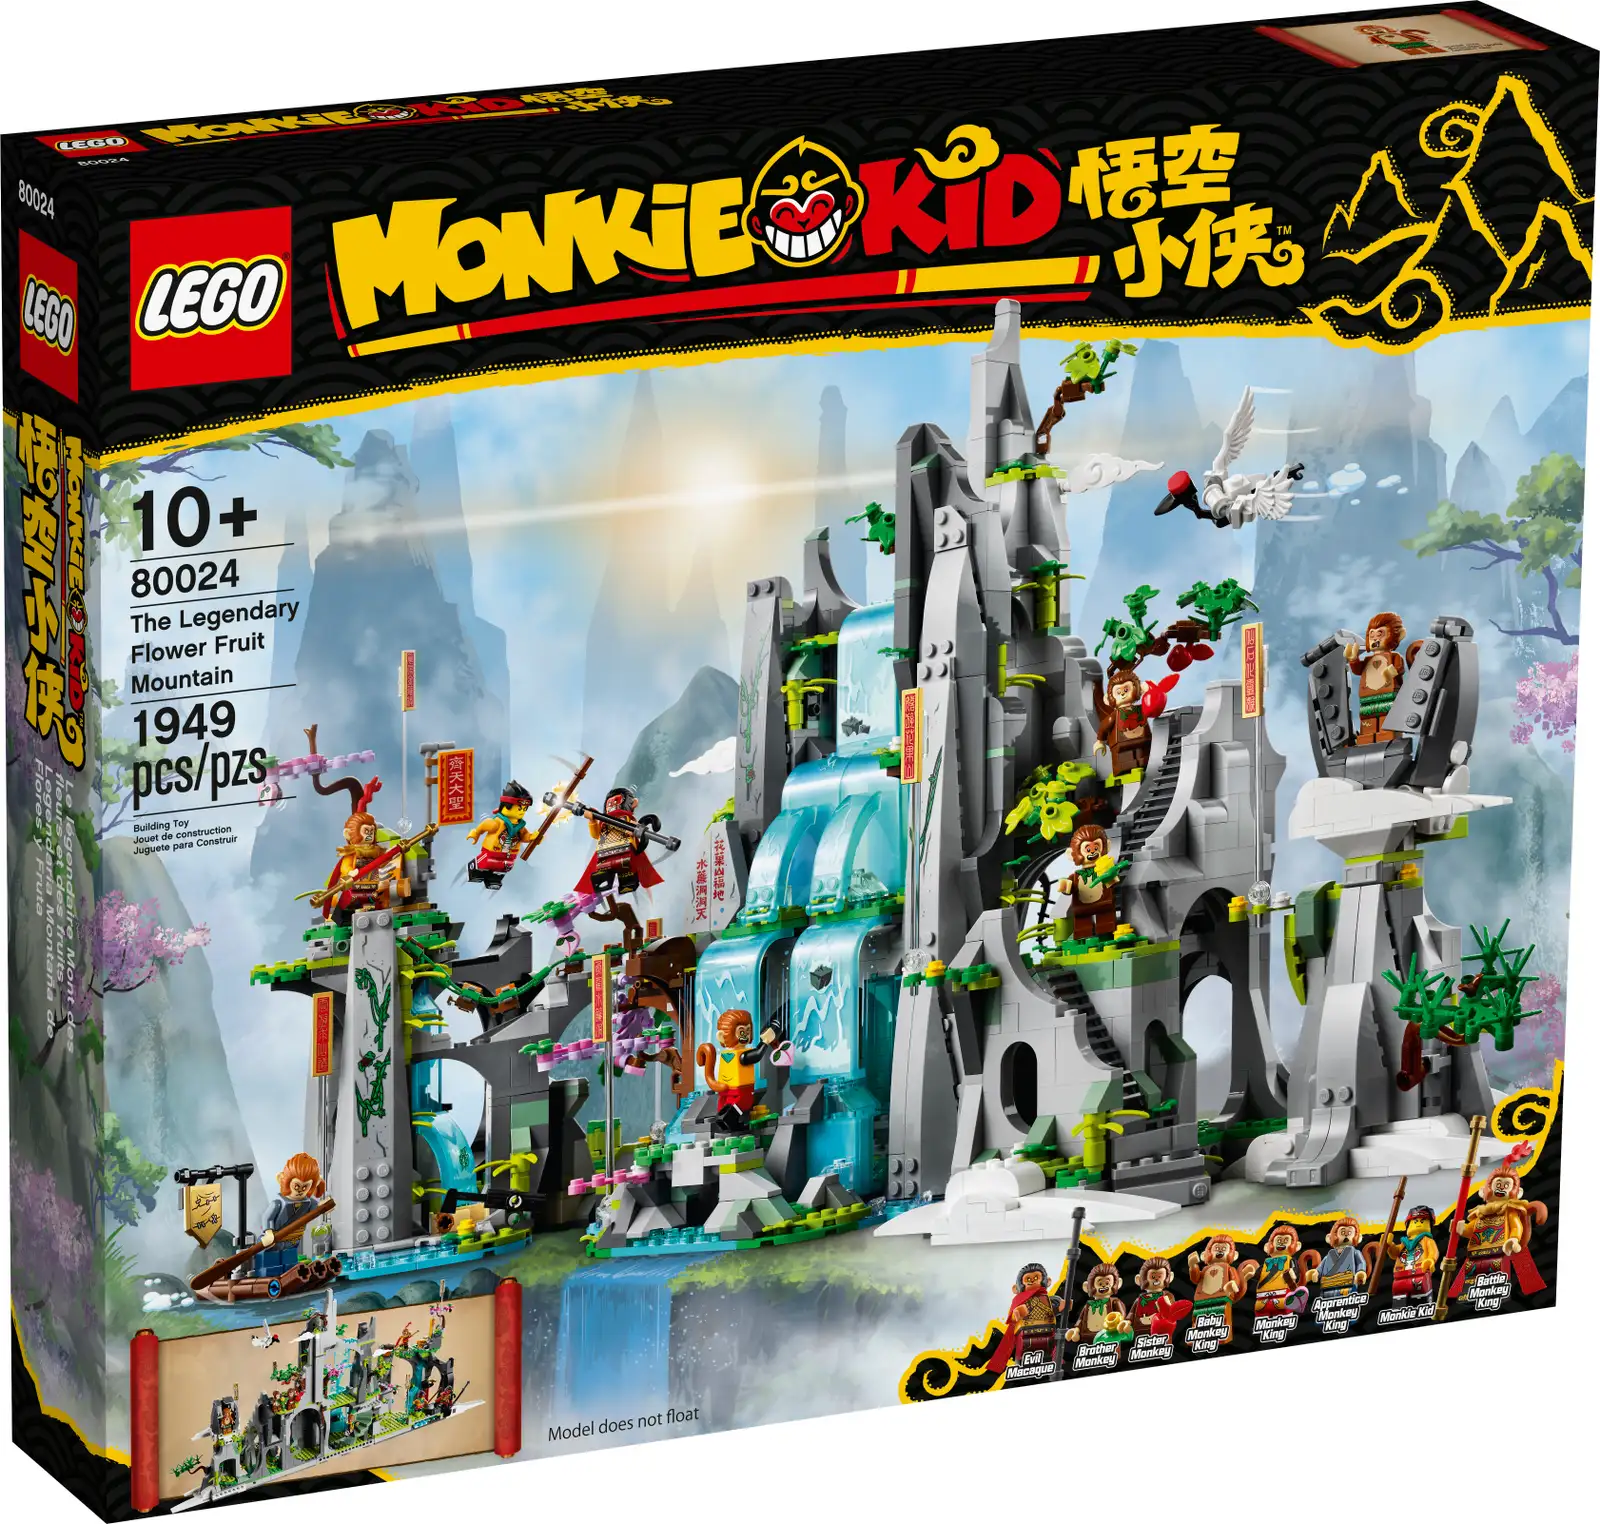 Children can bring the legend of the Monkey King to life as they build this detailed LEGO® Monkie Kid™ model of the iconic Flower Fruit Mountain (80024). Every section of the premium-quality toy playset tells a different story, from how he was born to how he became king of the monkeys, with features such as an opening rock to reveal the Monkey King and a buildable waterfall that opens to allow entry to the hidden mountain cave. There are 8 minifigures, including 4 different versions of Monkey King to play out specific legendary tales. Interactive instructions Find clear instructions in the box and Instructions PLUS in the free LEGO Building Instructions app, which makes the construction process even more exciting for kids with intuitive tools to help them visualize the model. Build and learn Inspired by the classic Journey to the West novel and rooted in China’s culture, awesome LEGO Monkie Kid building toys make the best gifts for kids to help nurture their creativity and resilience. Epic tales of the legendary Monkey King come to life as children build each section of this awesome LEGO® Monkie Kid™ Flower Fruit Mountain toy playset (80024). Includes 8 minifigures: Monkie Kid, Evil Macaque, Brother Monkey, Sister Monkey and 4 versions of Monkey King (Baby, Classic, Apprentice and Battle) to role-play stories from the classic tale. Packed with authentic, storytelling features, including an opening rock to reveal the Monkey King, a buildable waterfall that opens to allow entry to the mountain and a buildable red-crowned crane. Role-play battle scenes with Monkie Kid and the Evil Macaque minifigures on a rotating platform – and look out for the Chinese calligraphy. Offering a challenging build and unlimited play, this 1,947-piece LEGO® Monkie Kid™ construction toy makes the best birthday, holiday or surprise present for trend-setting kids aged 10 and up. Measuring over 13.5 in. (34 cm) high, 27 in. (68 cm) wide and 10 in. (25 cm) deep, this unique toy will have everyone talking and makes a stunning display piece between playtime adventures. Printed instructions are included, while digital Instructions PLUS, available in the LEGO® Building Instructions app, allows kids to save their progress and restart the build anytime. LEGO® Monkie Kid™ toy building sets are inspired by the classic Chinese novel Journey to the West and help children develop their courage, resilience and optimism while having fun. LEGO® components meet strict industry standards to ensure that they are compatible and connect consistently and strongly. LEGO® bricks and pieces are tested in almost every way imaginable to satisfy the highest global safety standards.